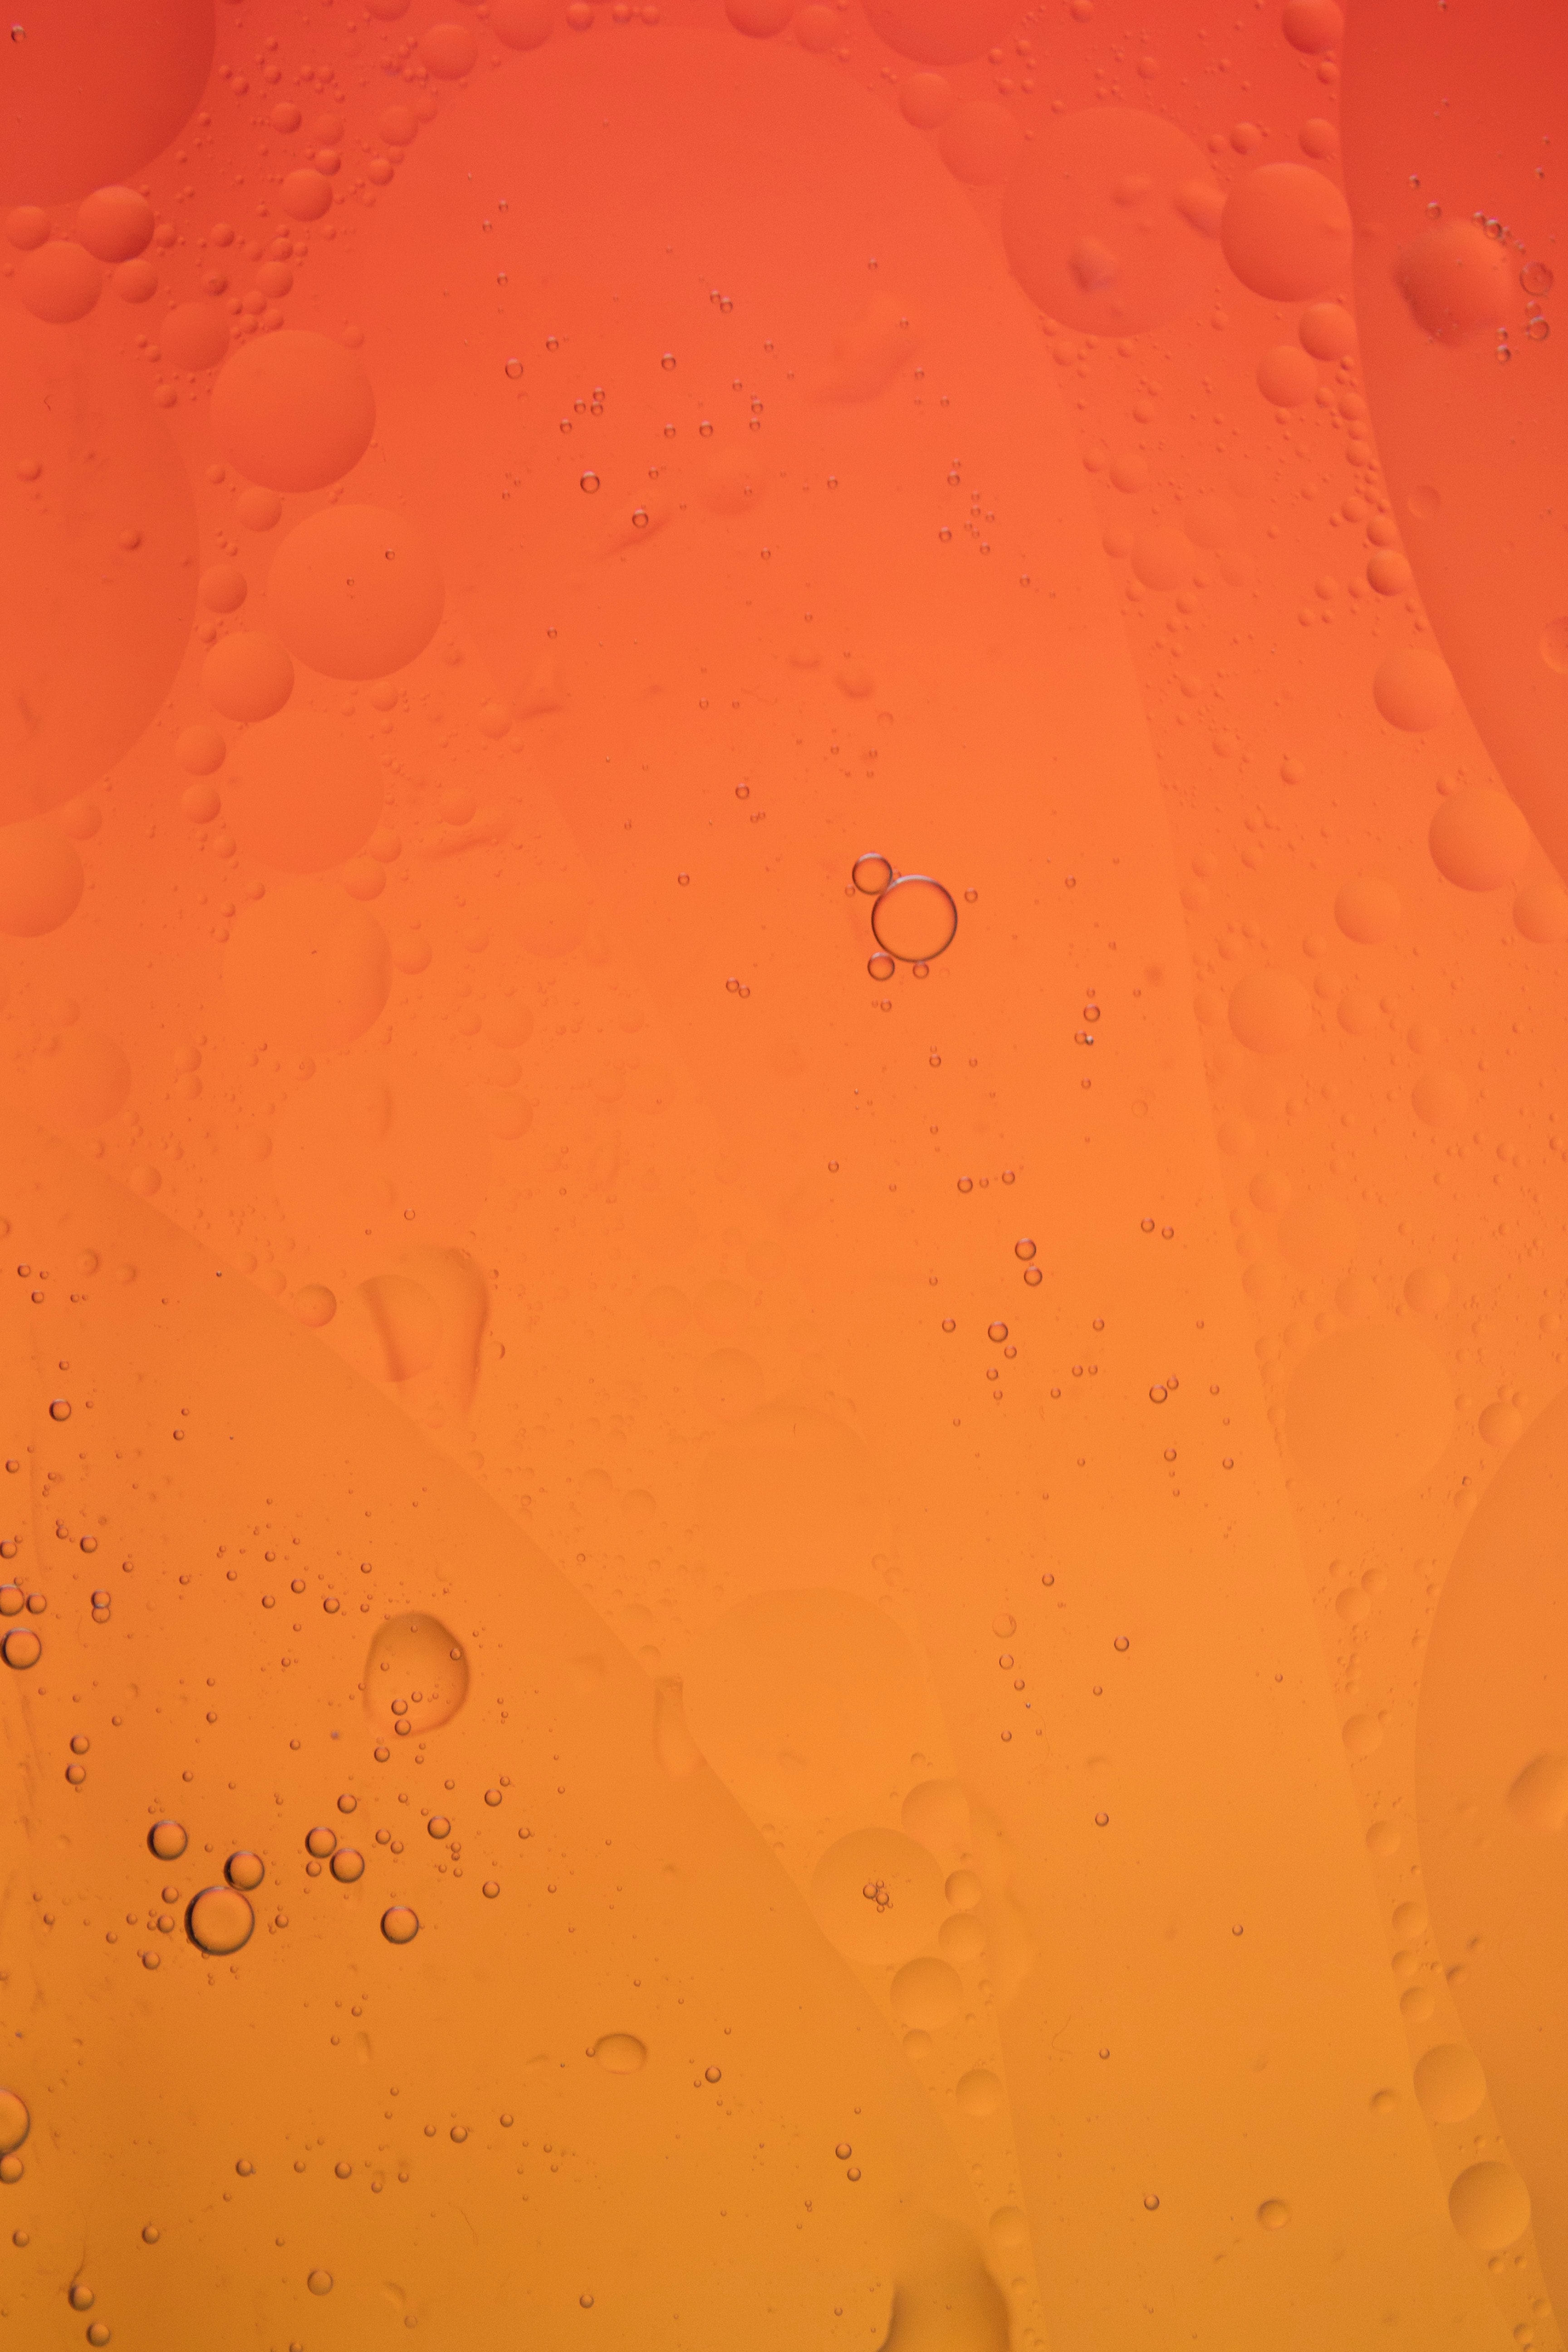 abstract, water, bubbles, orange Image for desktop